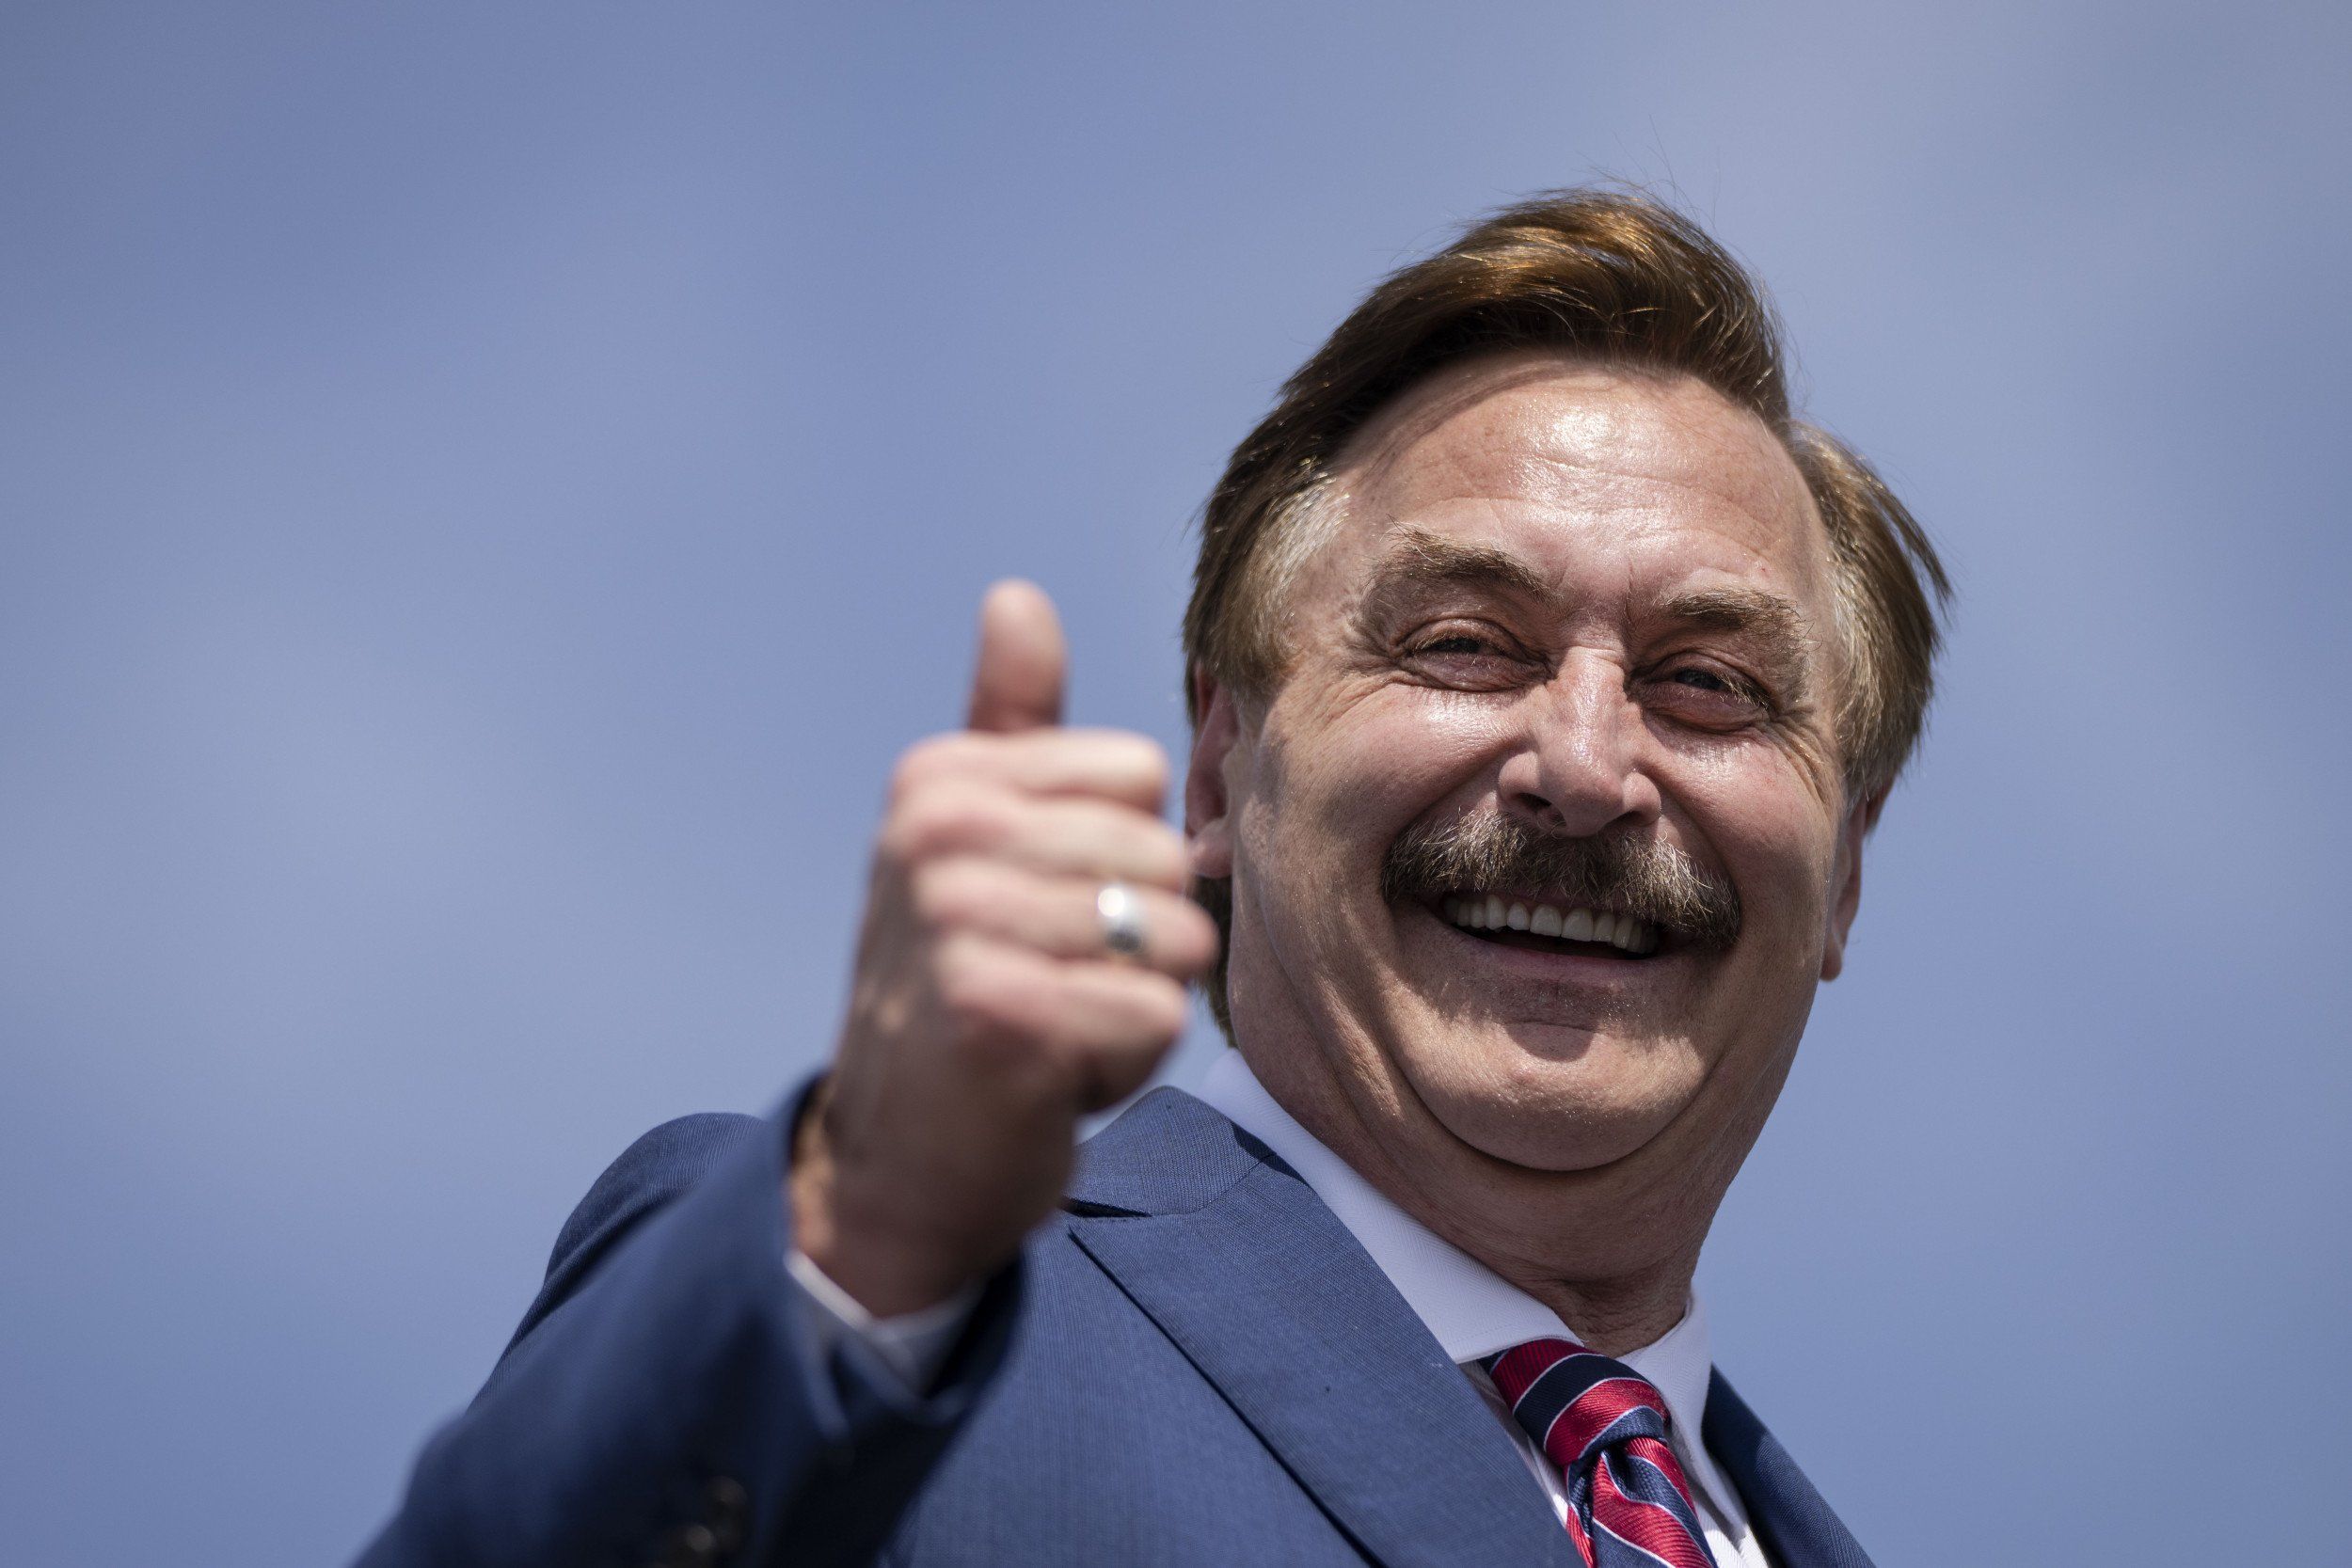 MyPillow CEO Mike Lindell re-joins Twitter, gets booted again